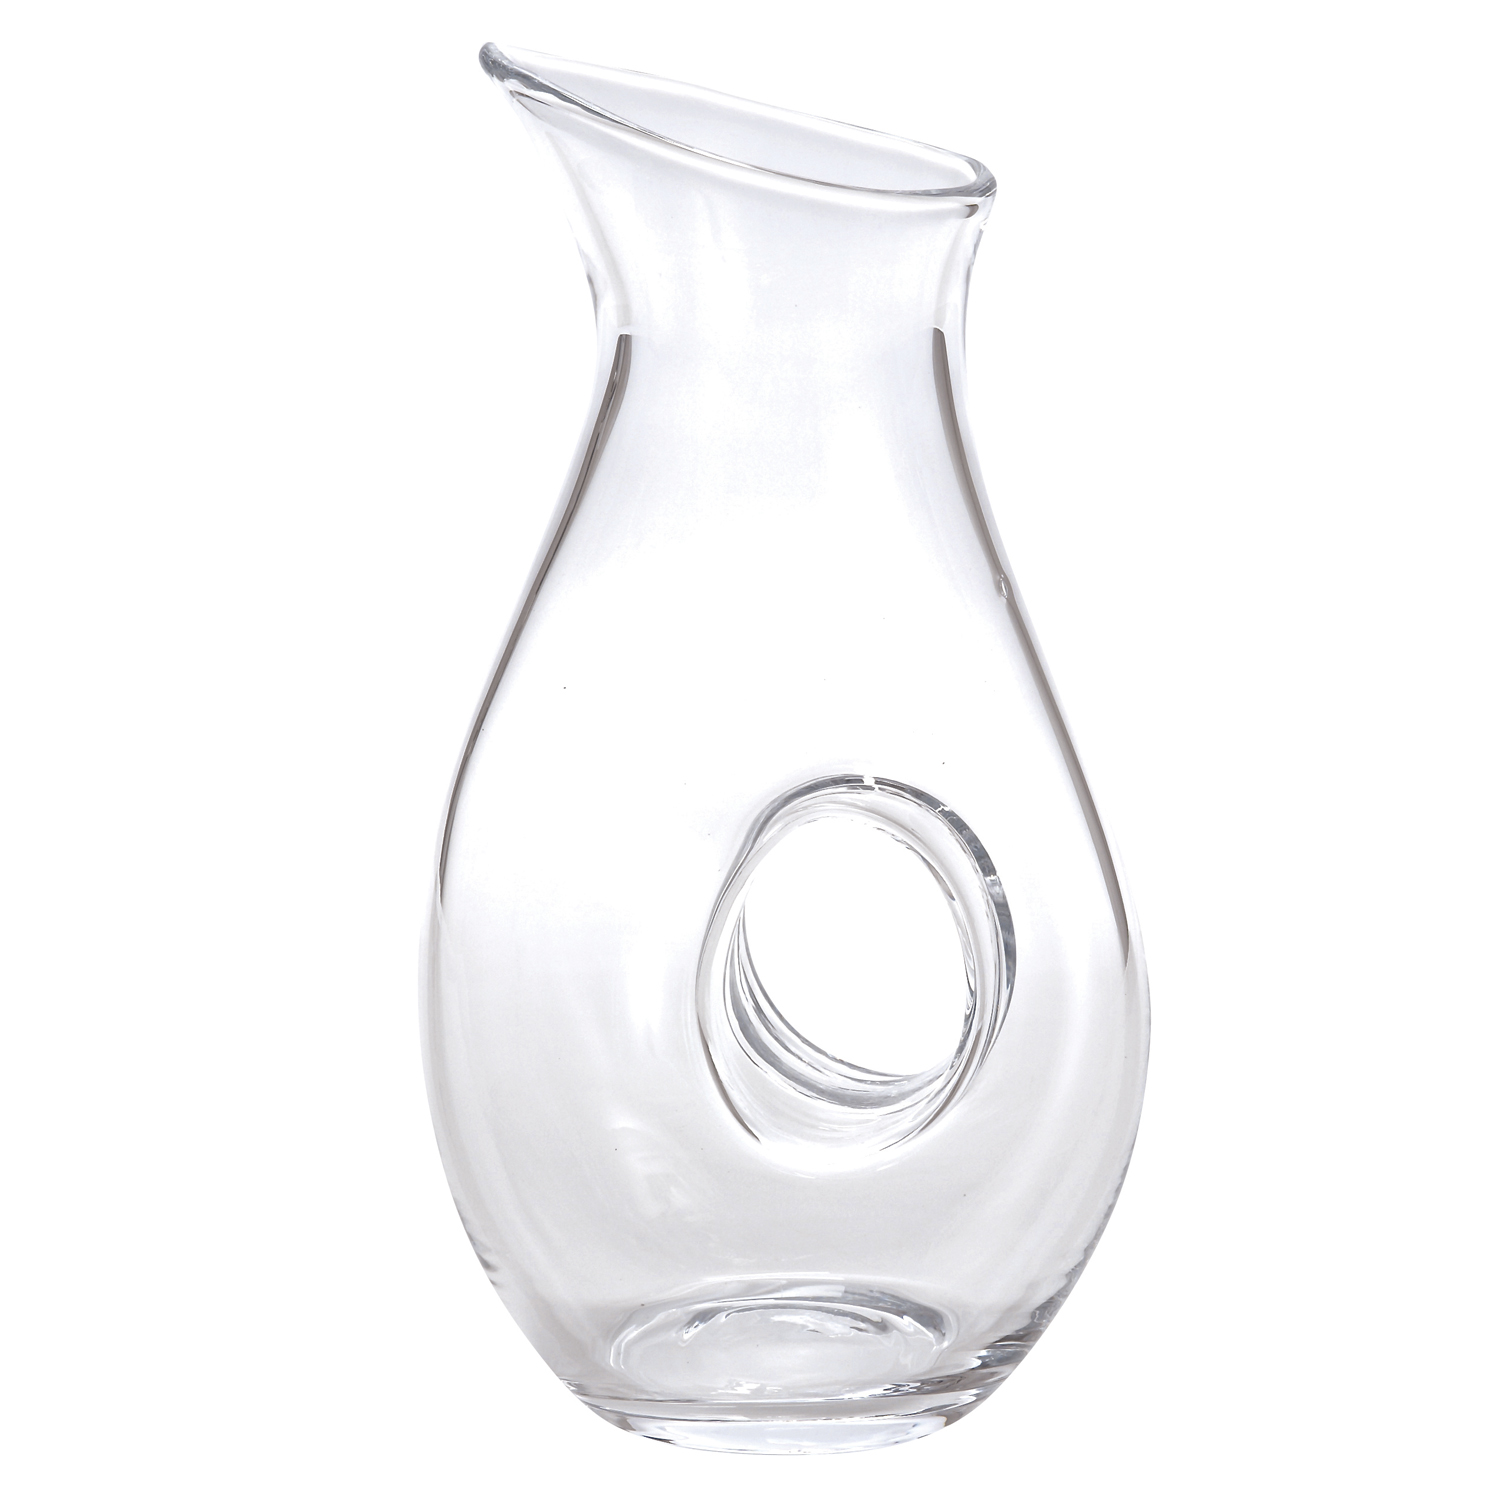 Mouth Blown Lead Free Crystal Pitcher - 28 oz